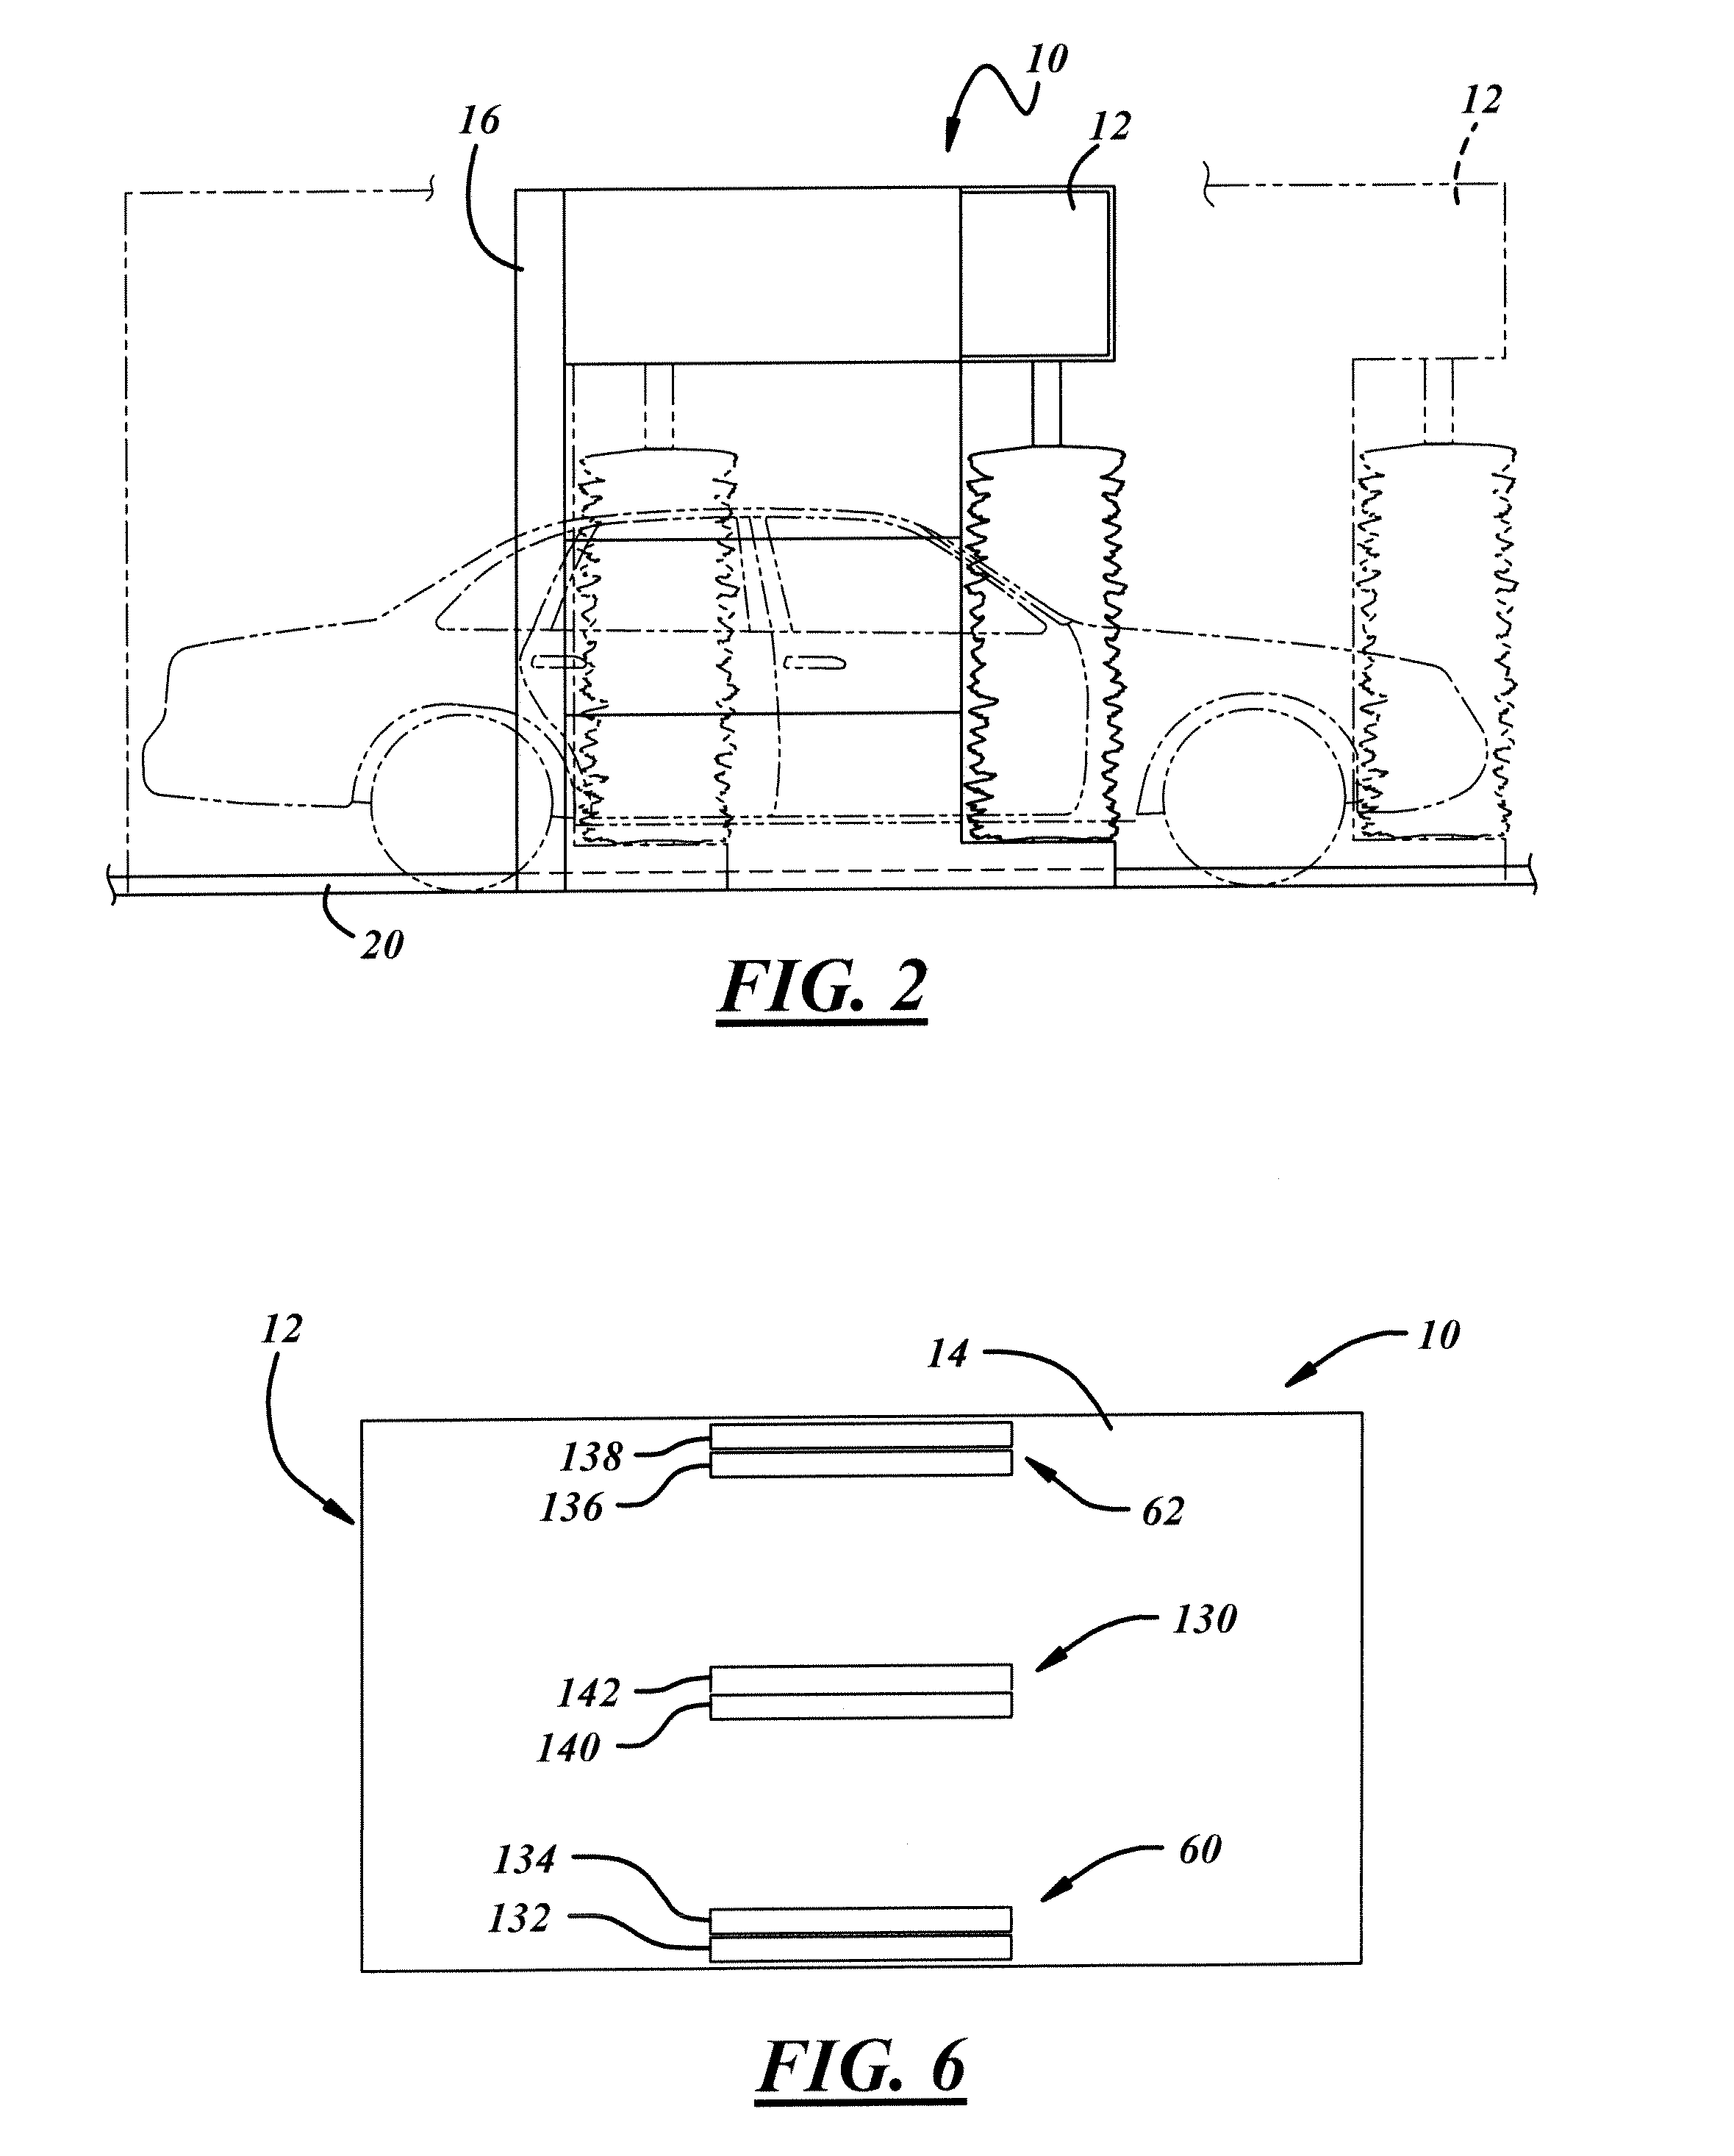 Multiple manifold system for a rollover vehicle wash system